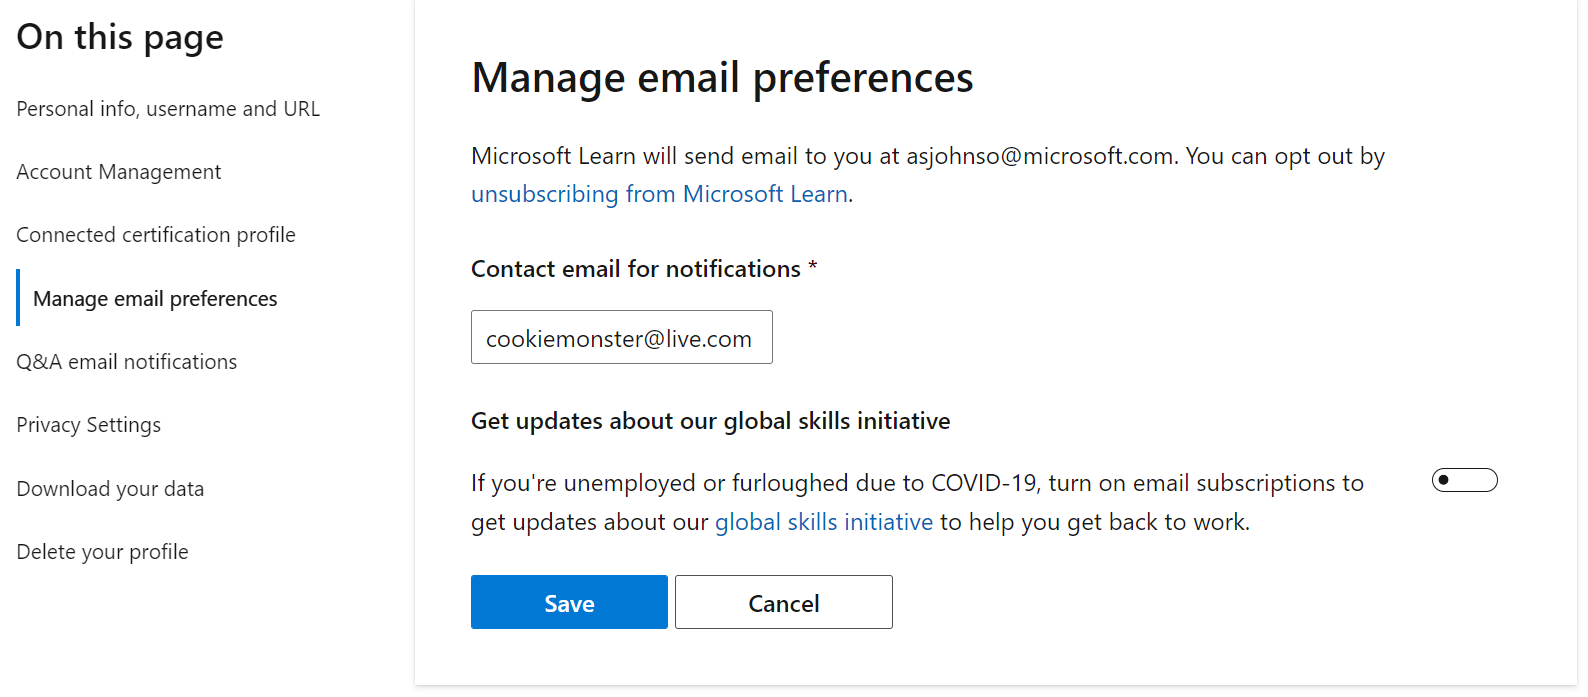 Screenshot of the Manage email preferences section in the Microsoft Learn profile settings.